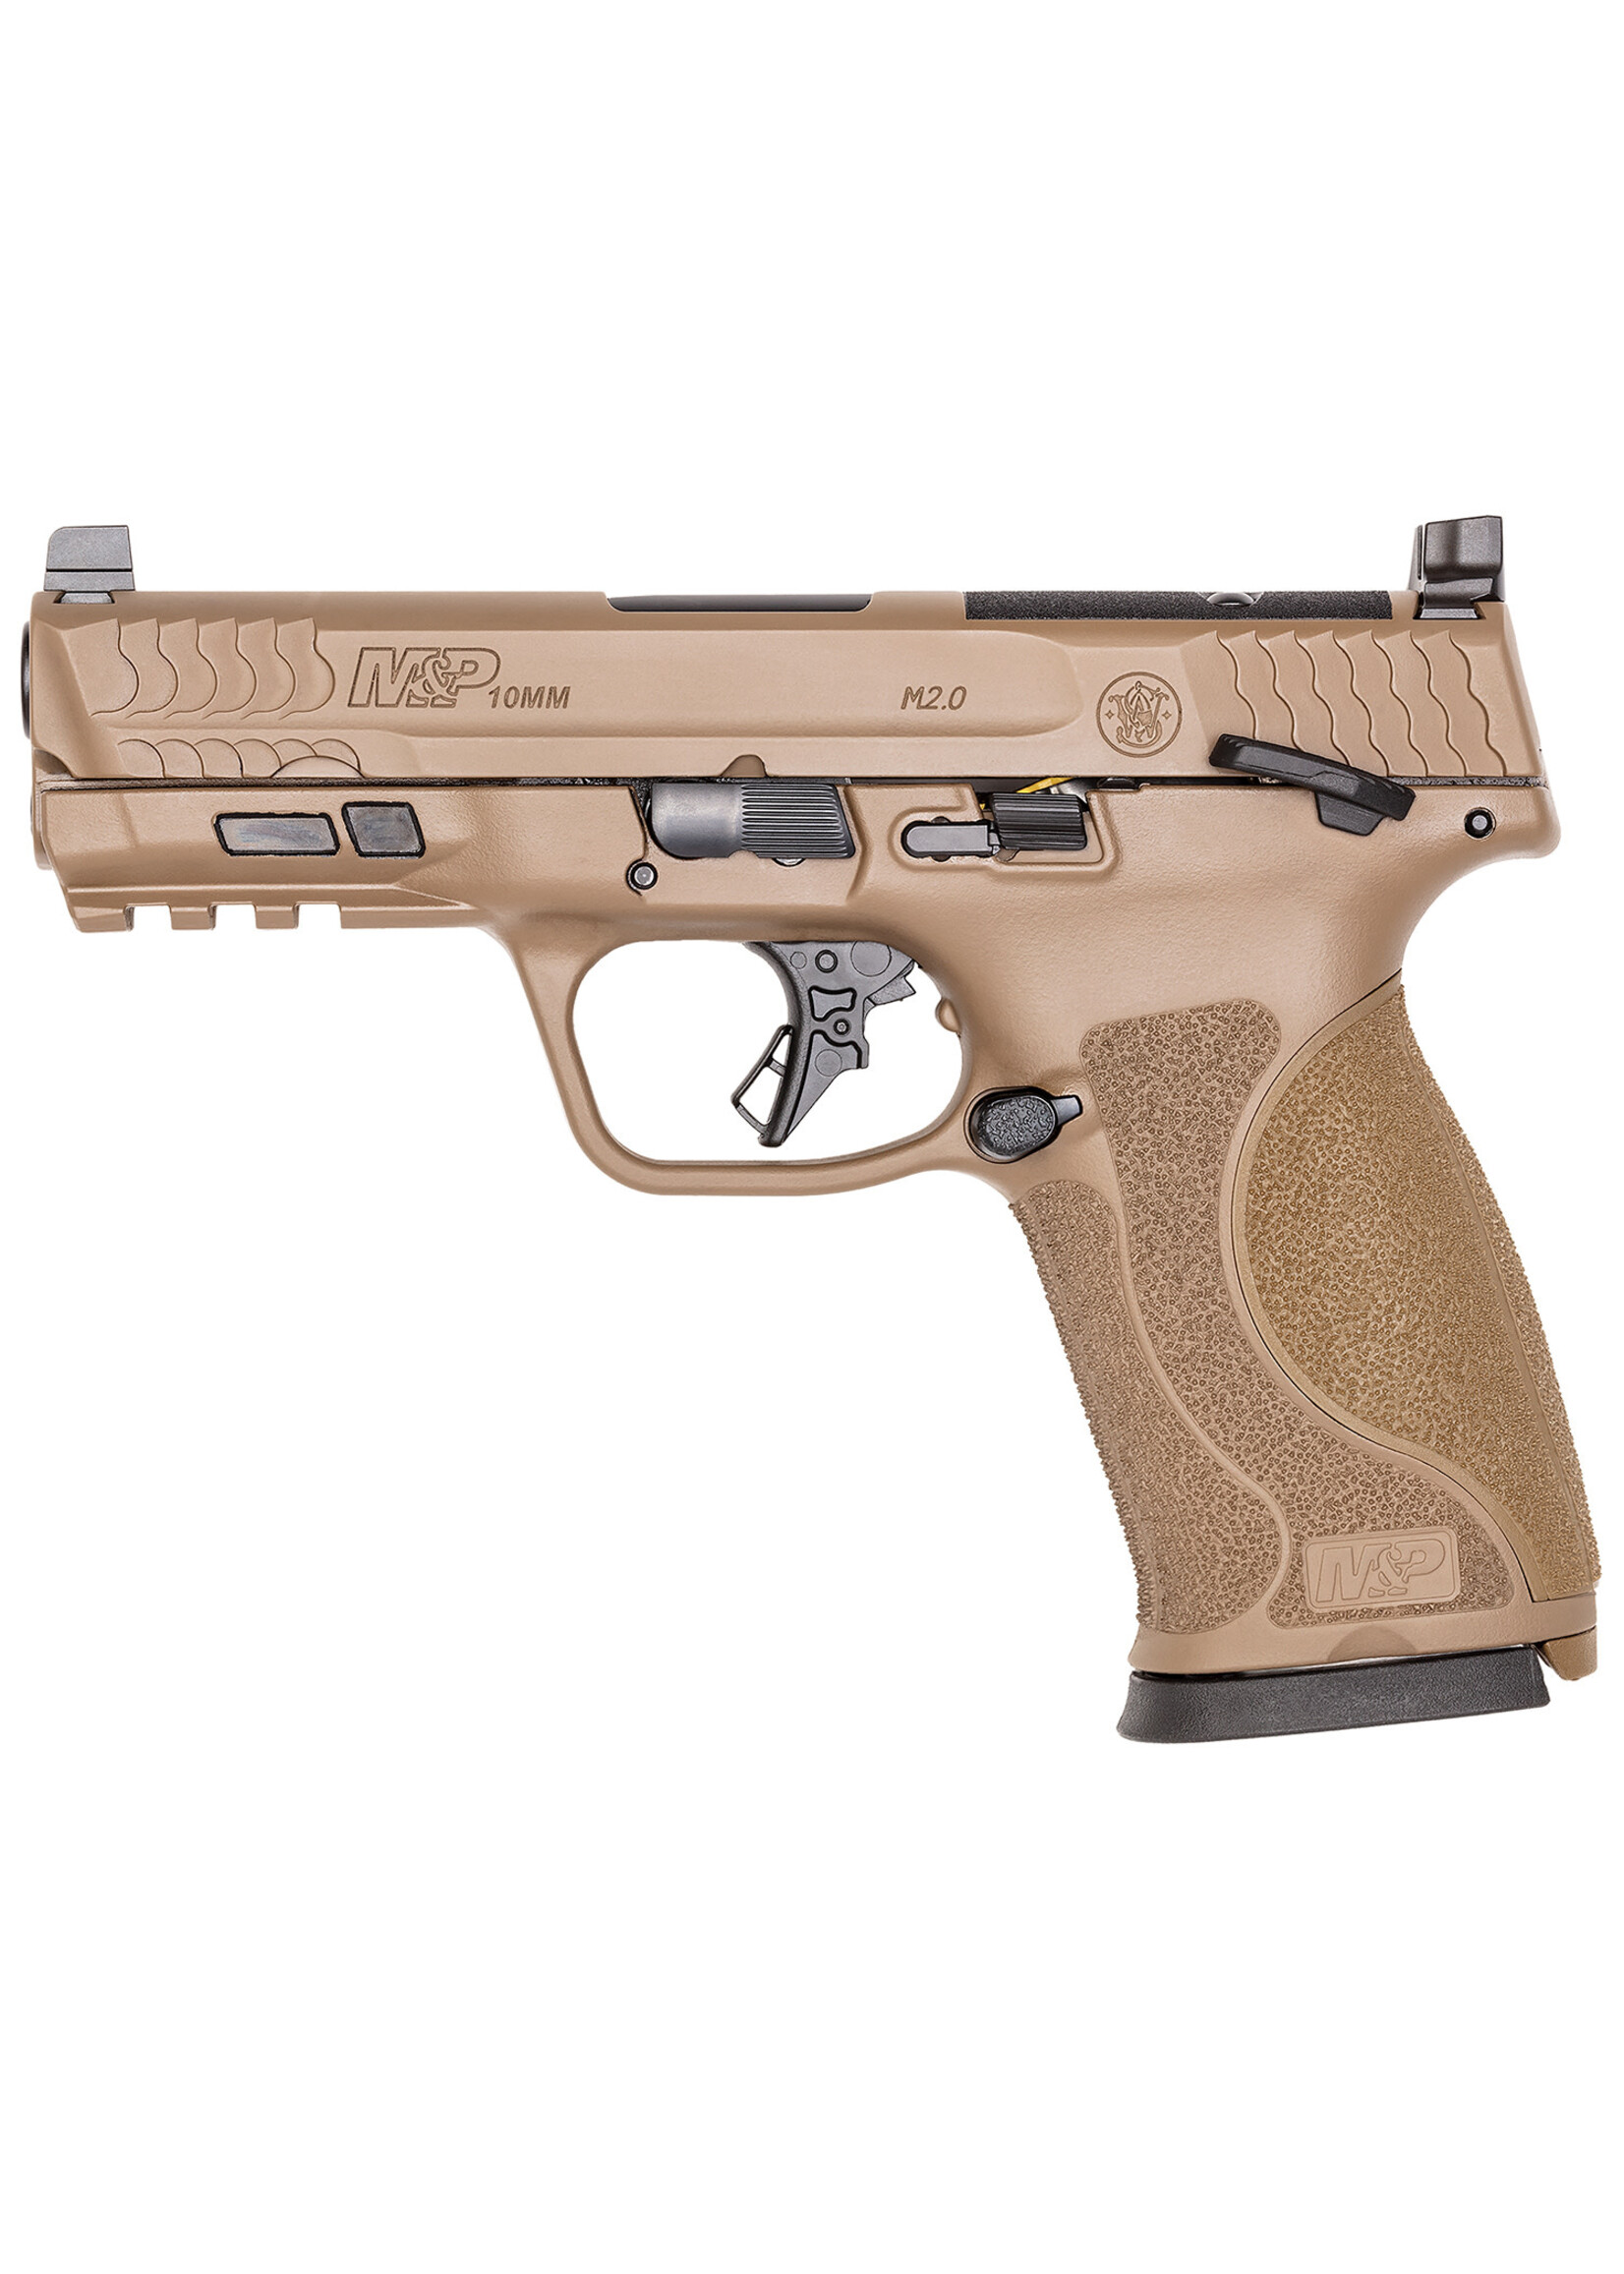 Smith and Wesson (S&W) Smith & Wesson, M&P M2.0, Striker Fired, Semi-automatic, Polymer Frame Pistol, Full Size, 10MM, 4" Barrel, Cerakote Finish, Flat Dark Earth, Optic Height White 3 Dot Sights, Thumb Safety, 15 Rounds, Optics Ready Slide, 2 Magazines